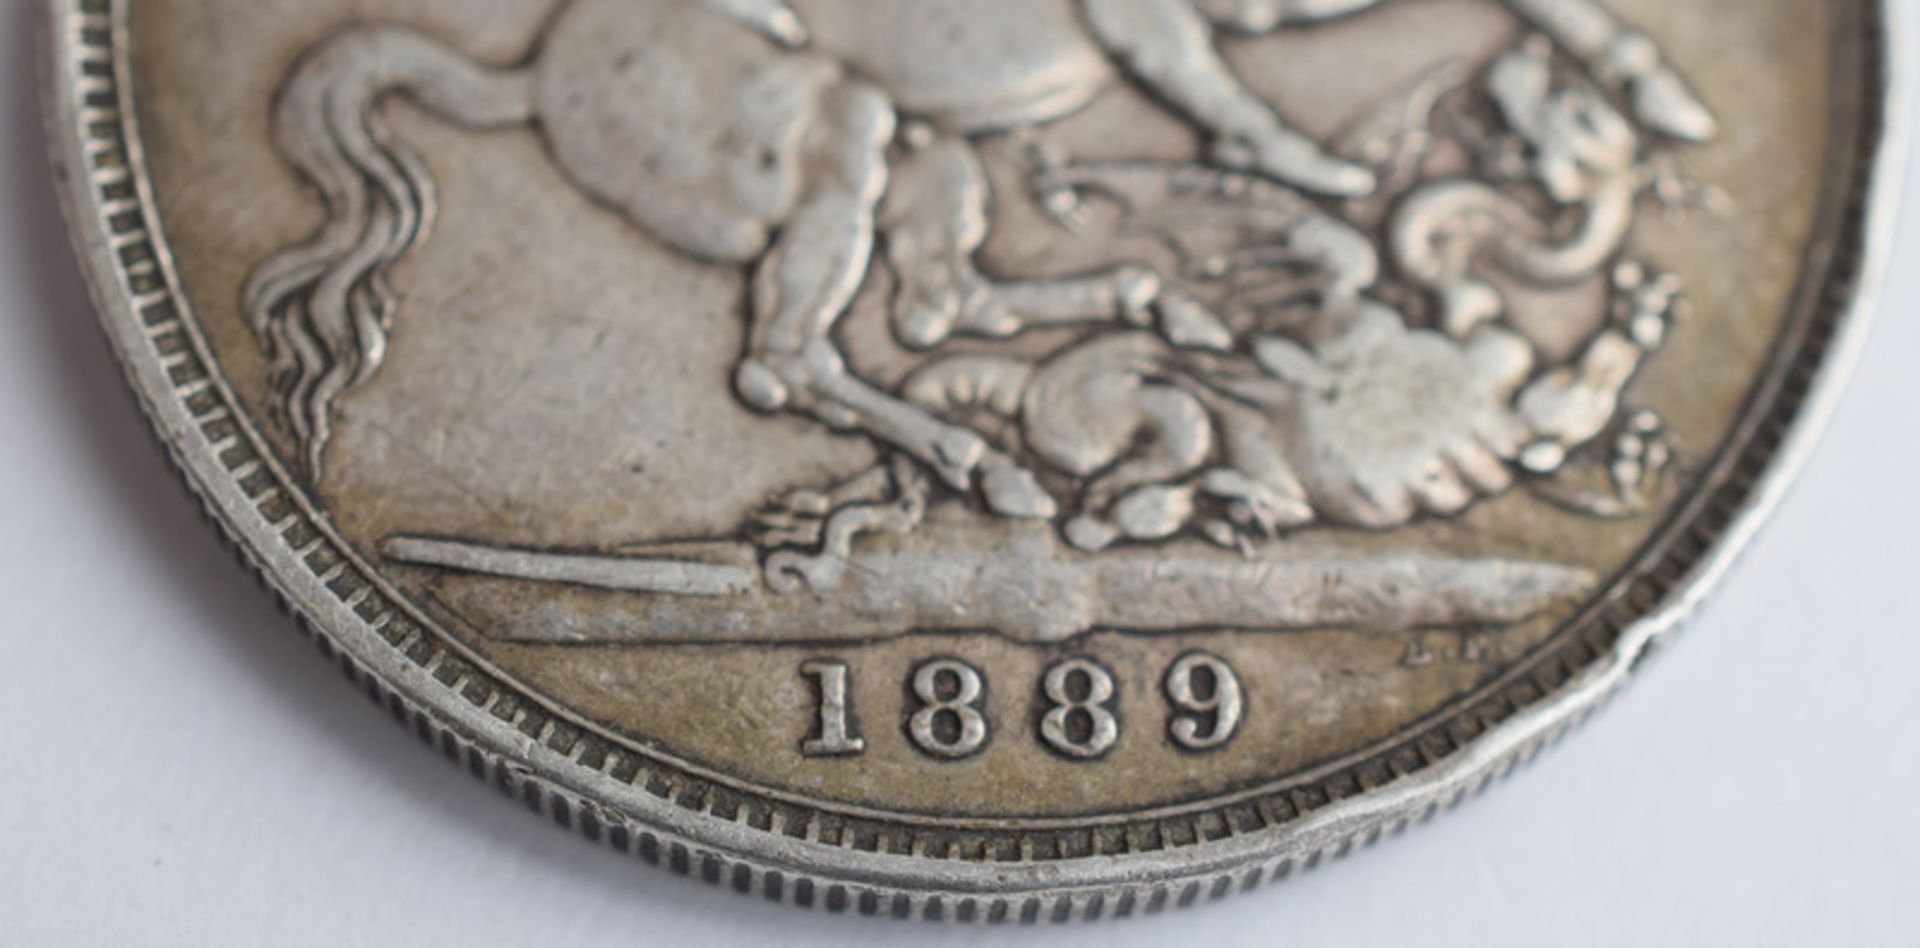 1899 Victorian Small Crown Silver Crown - Image 4 of 4